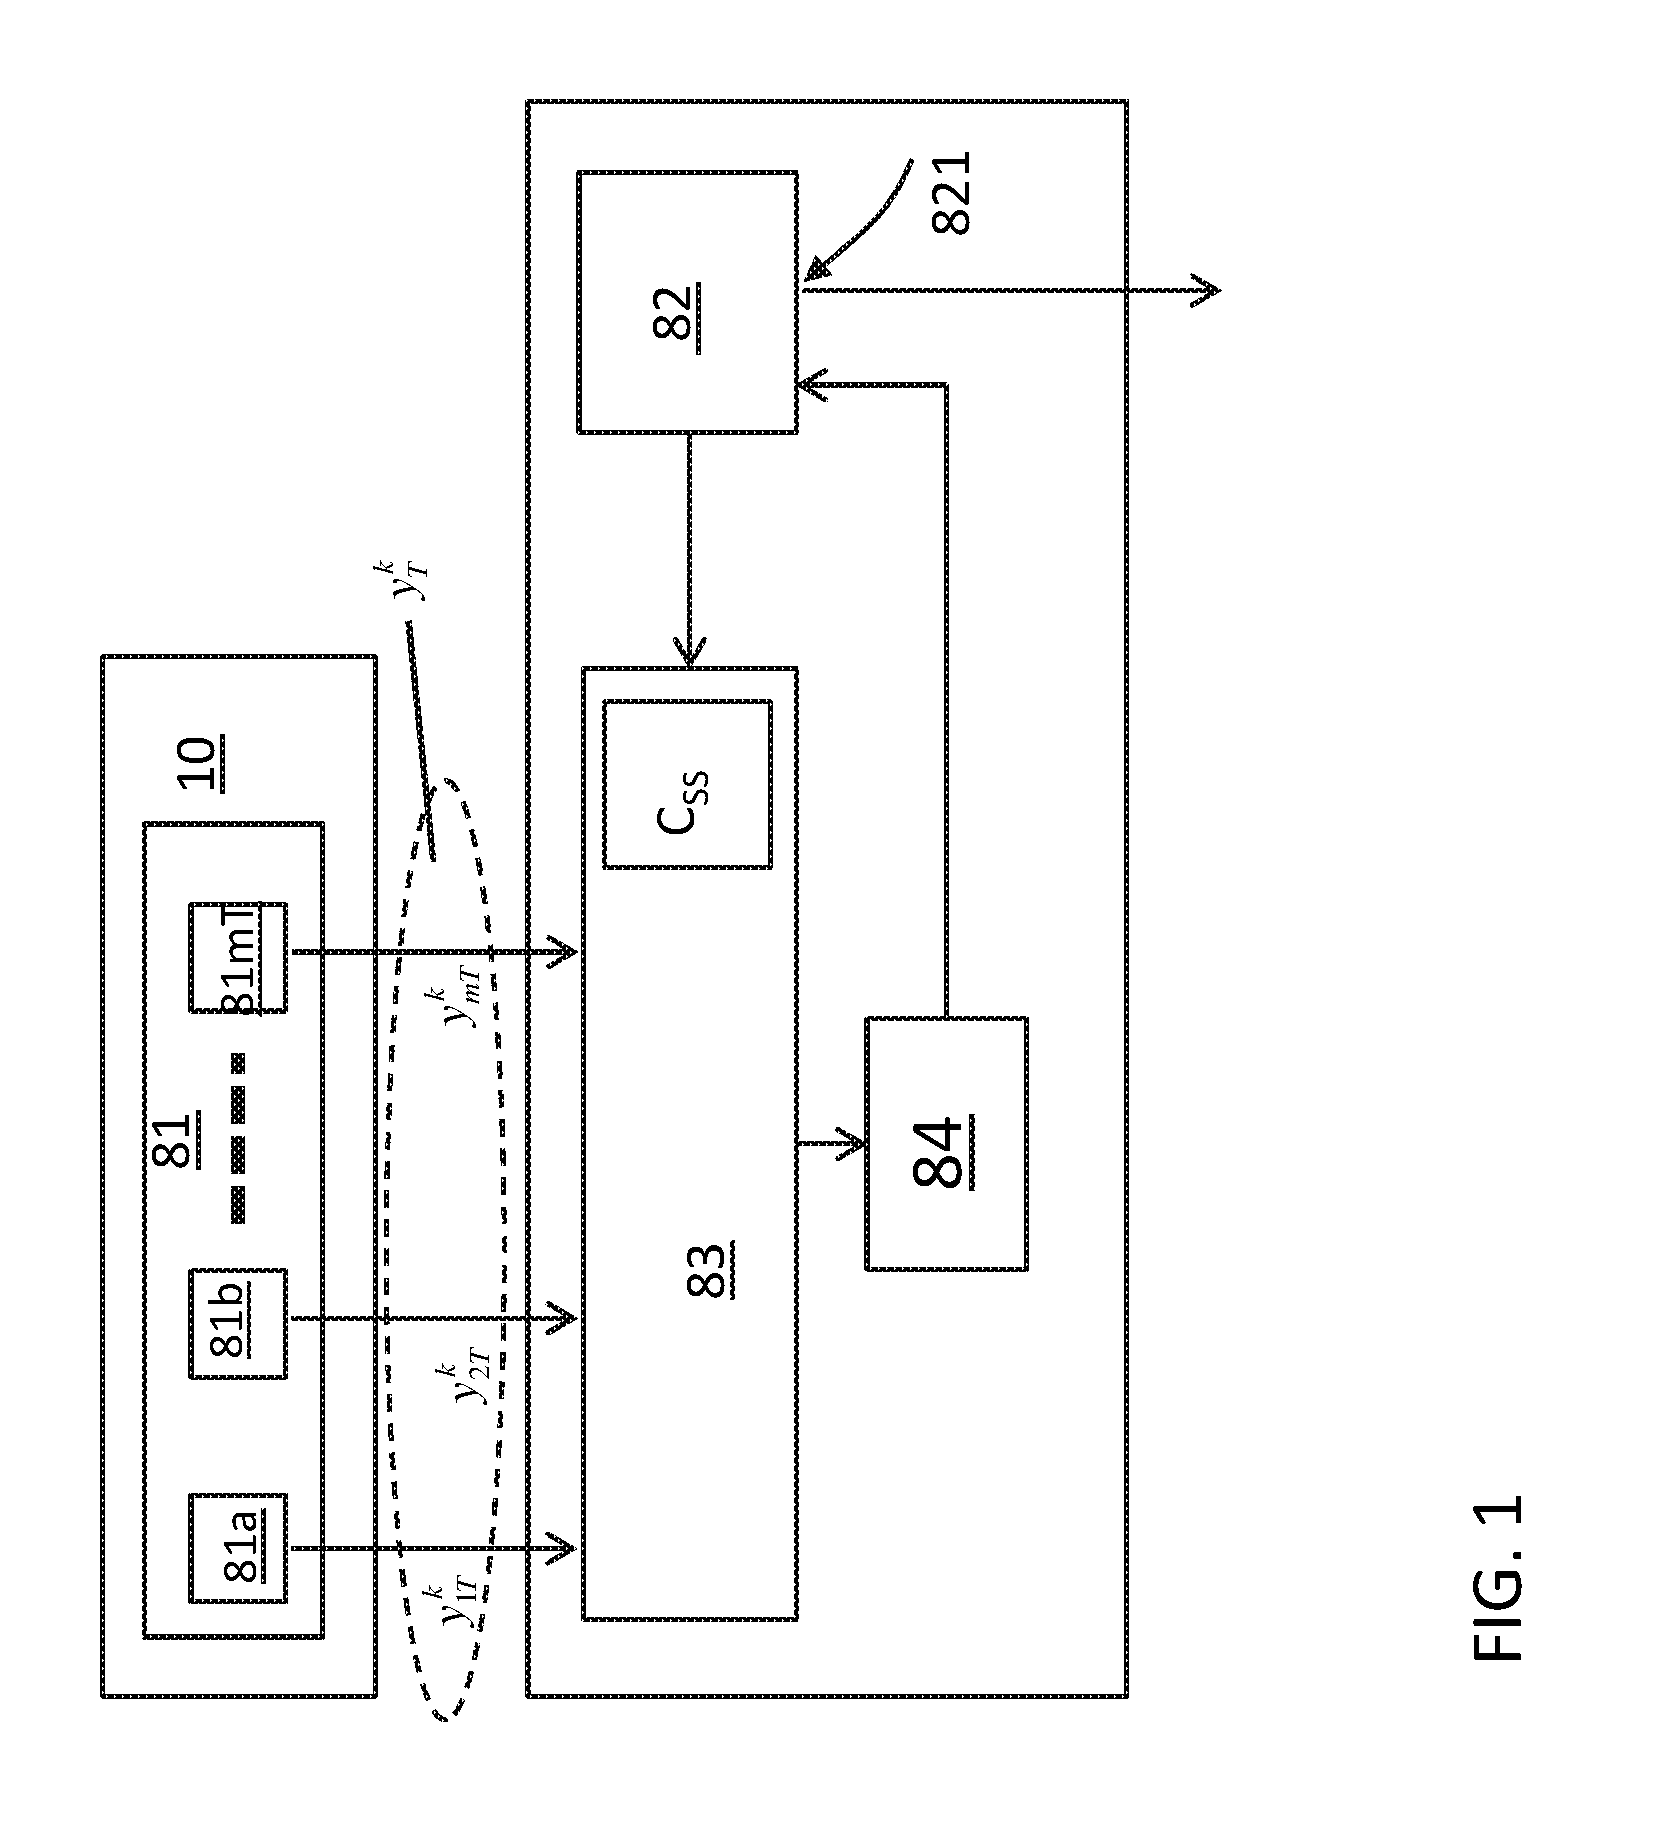 System and method for monitoring a state of a fluid in an indoor space as well as a climate control system